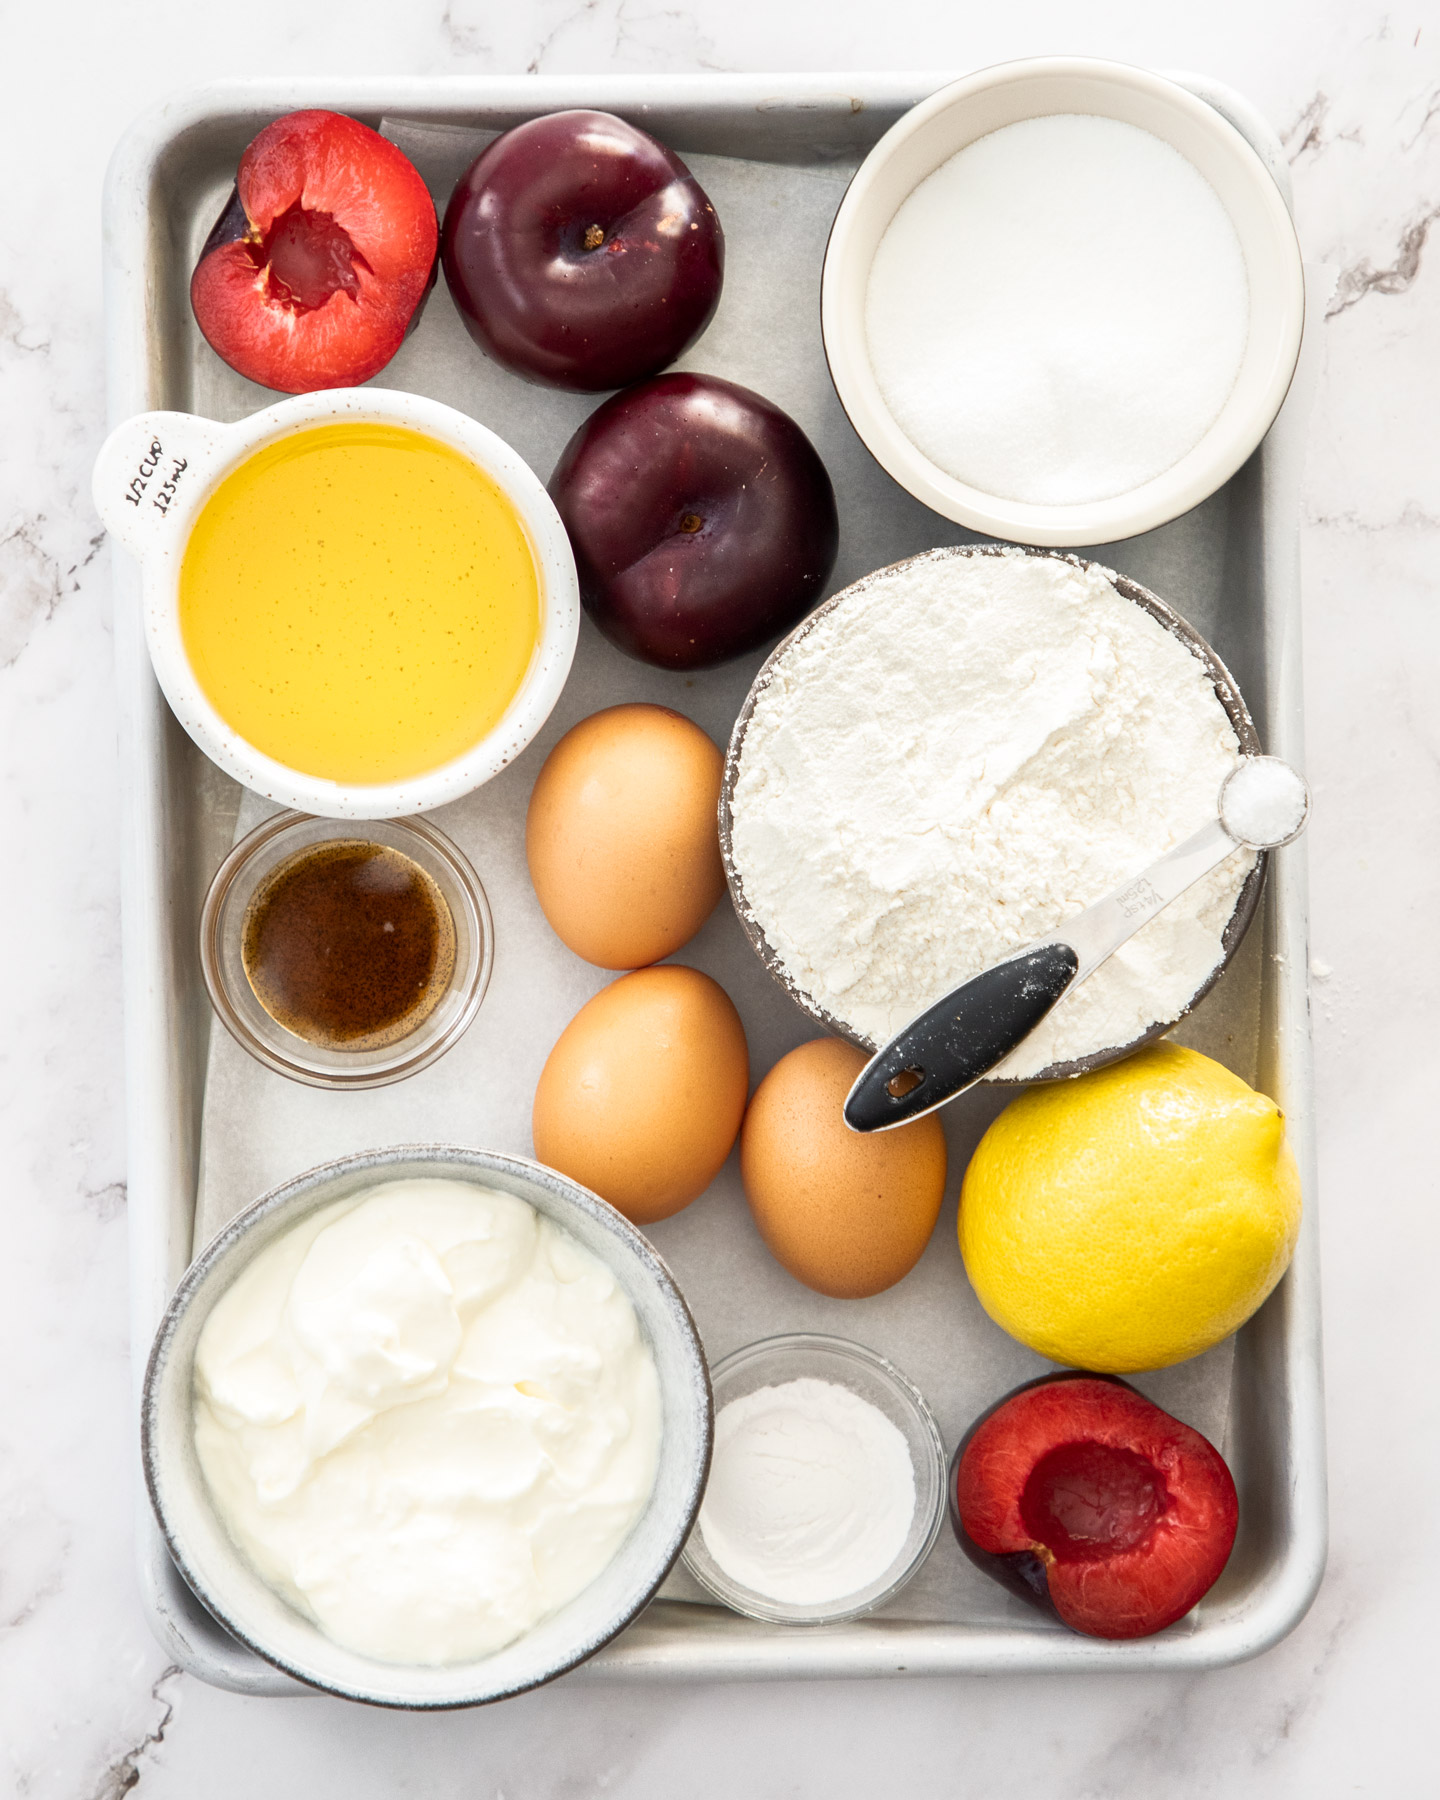 Ingredients for plum cake on a baking tray.